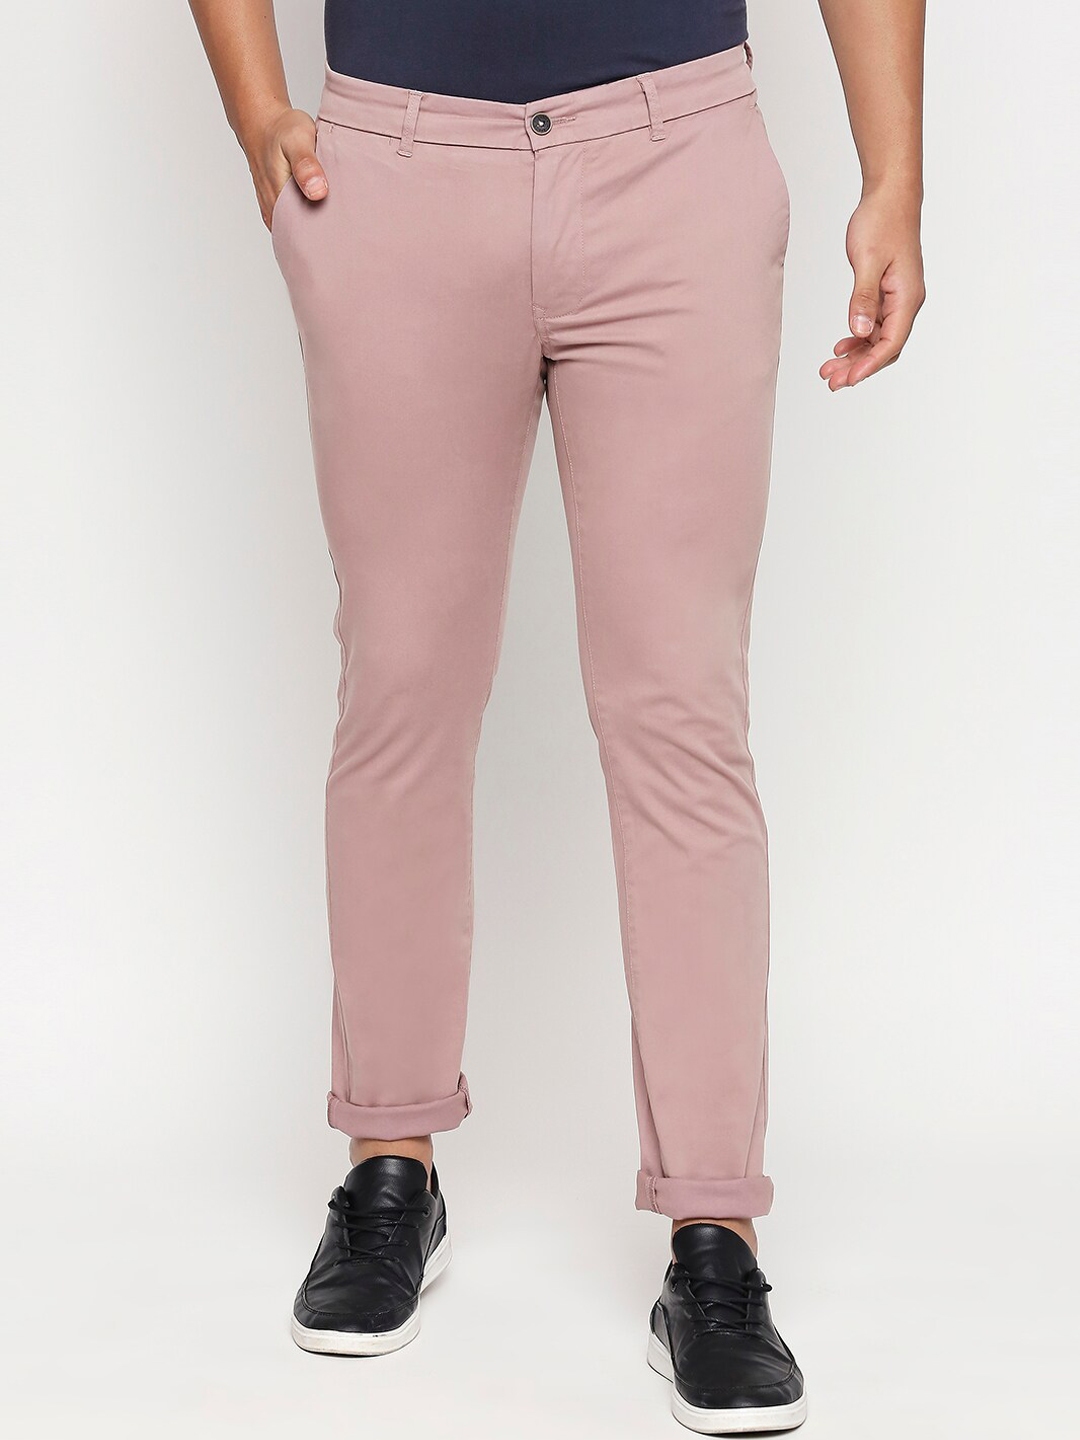 Buy Basics Men Pink Tapered Fit High Rise Chinos Trousers - Trousers ...